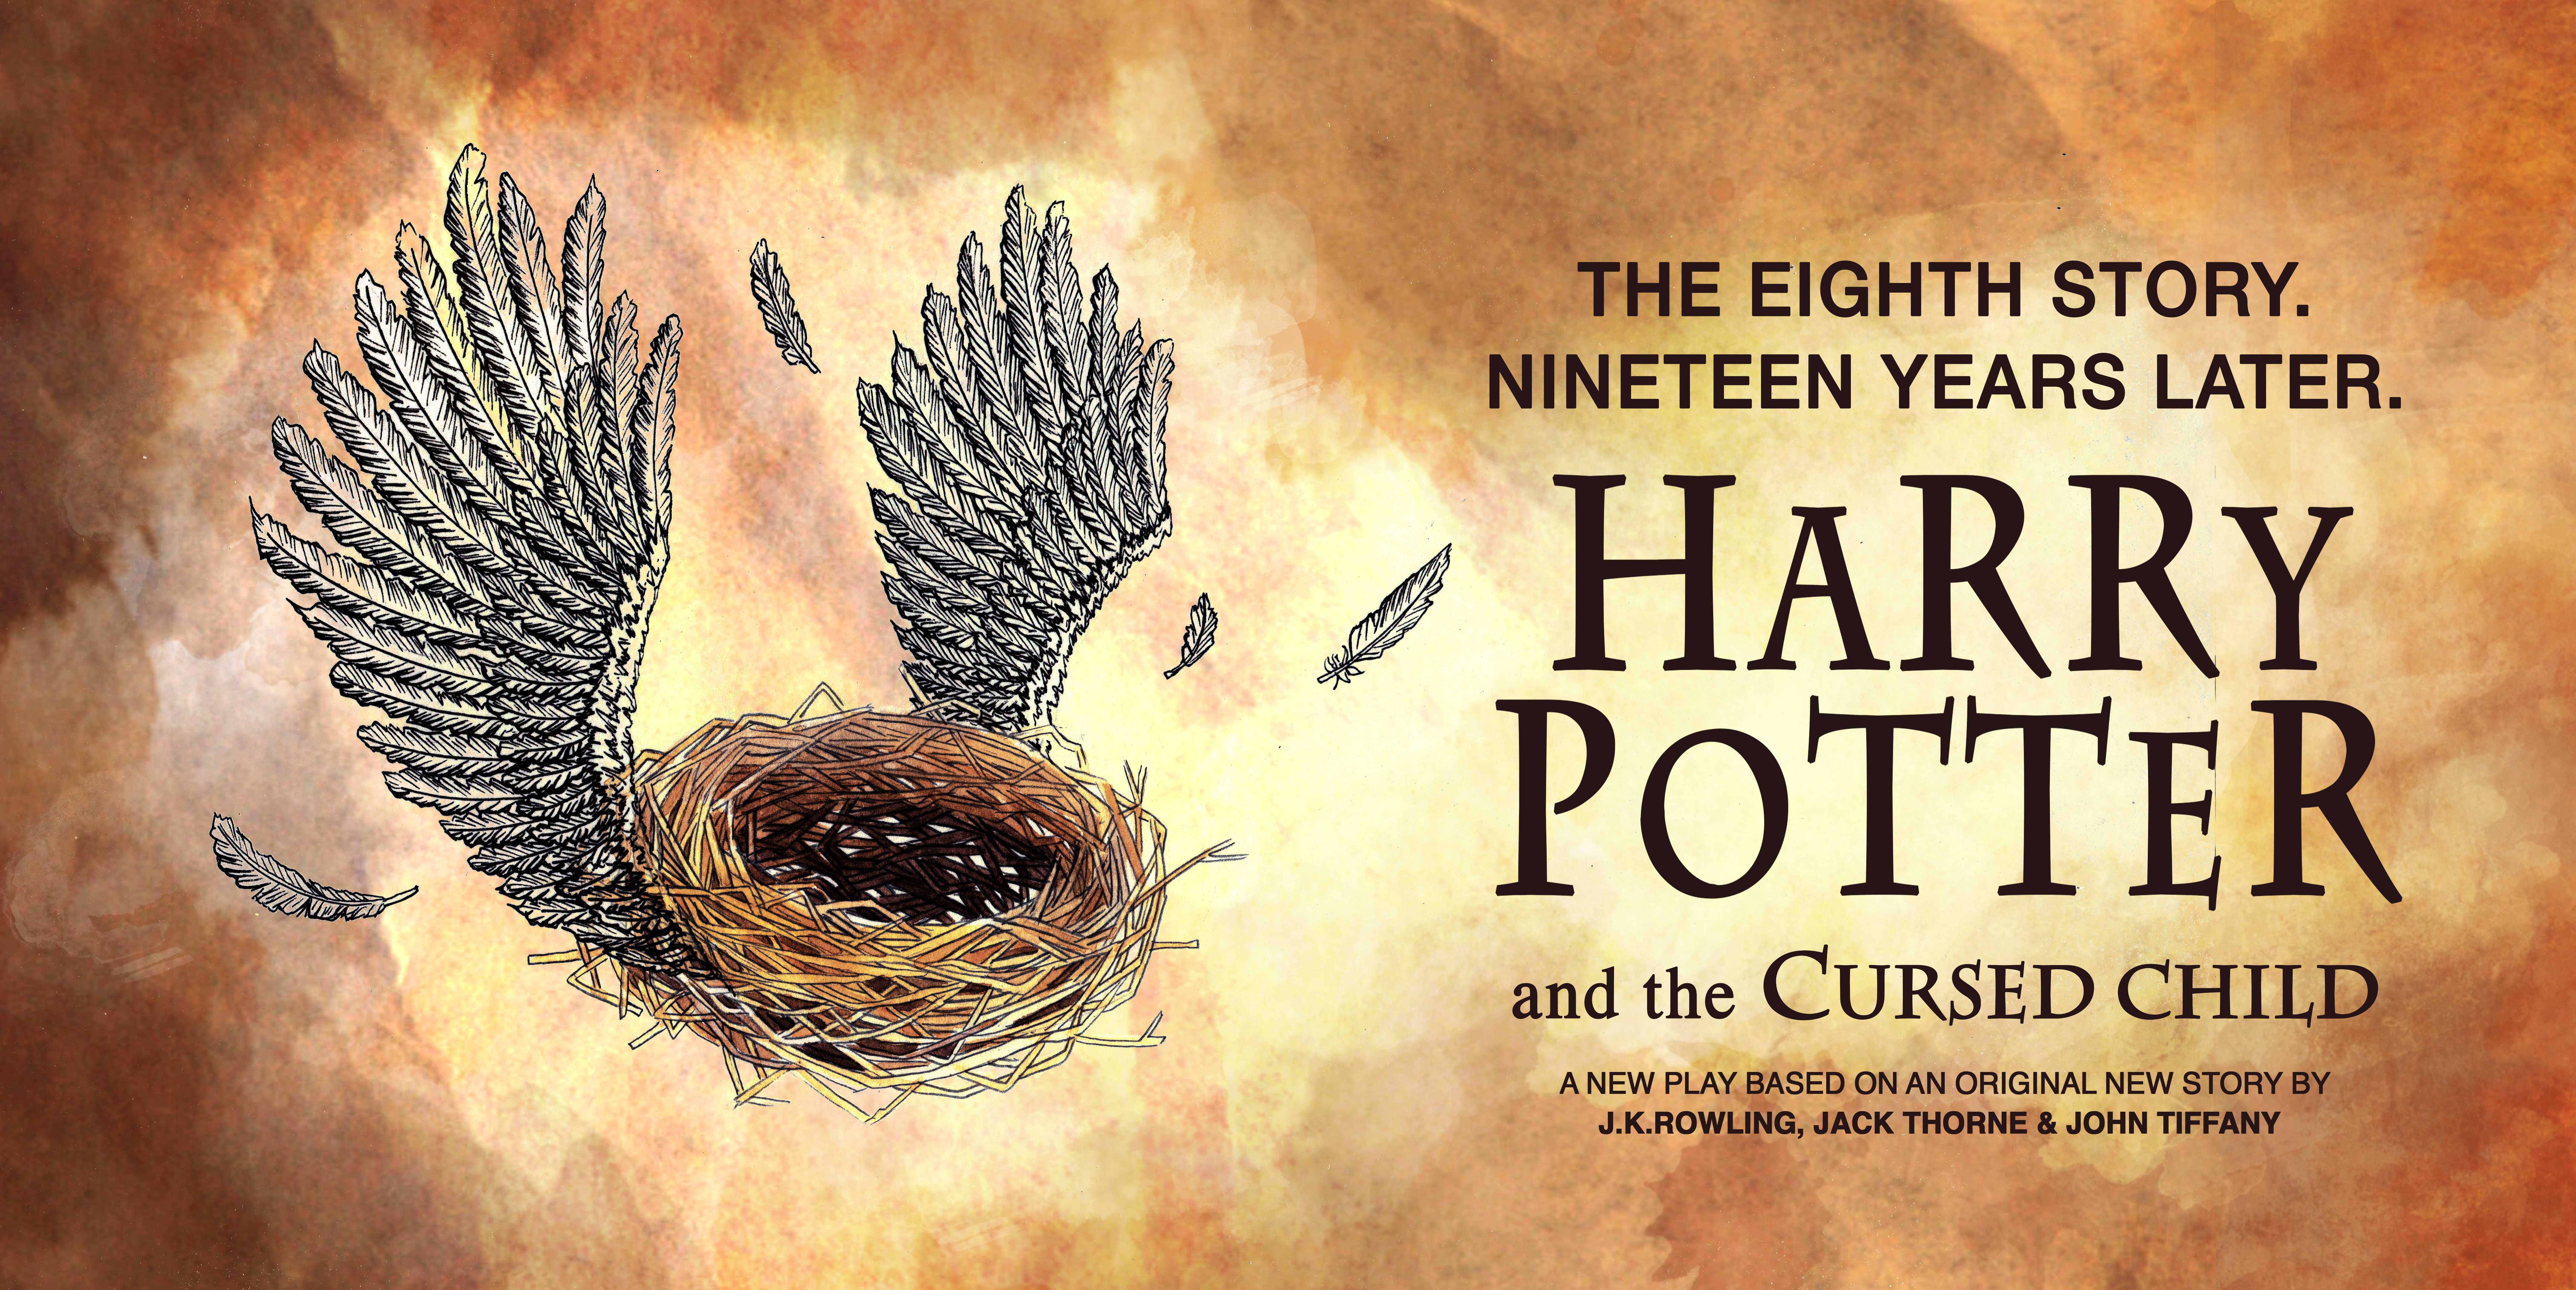 Harry Potter an the Curse Child background shows a birds nest with wings